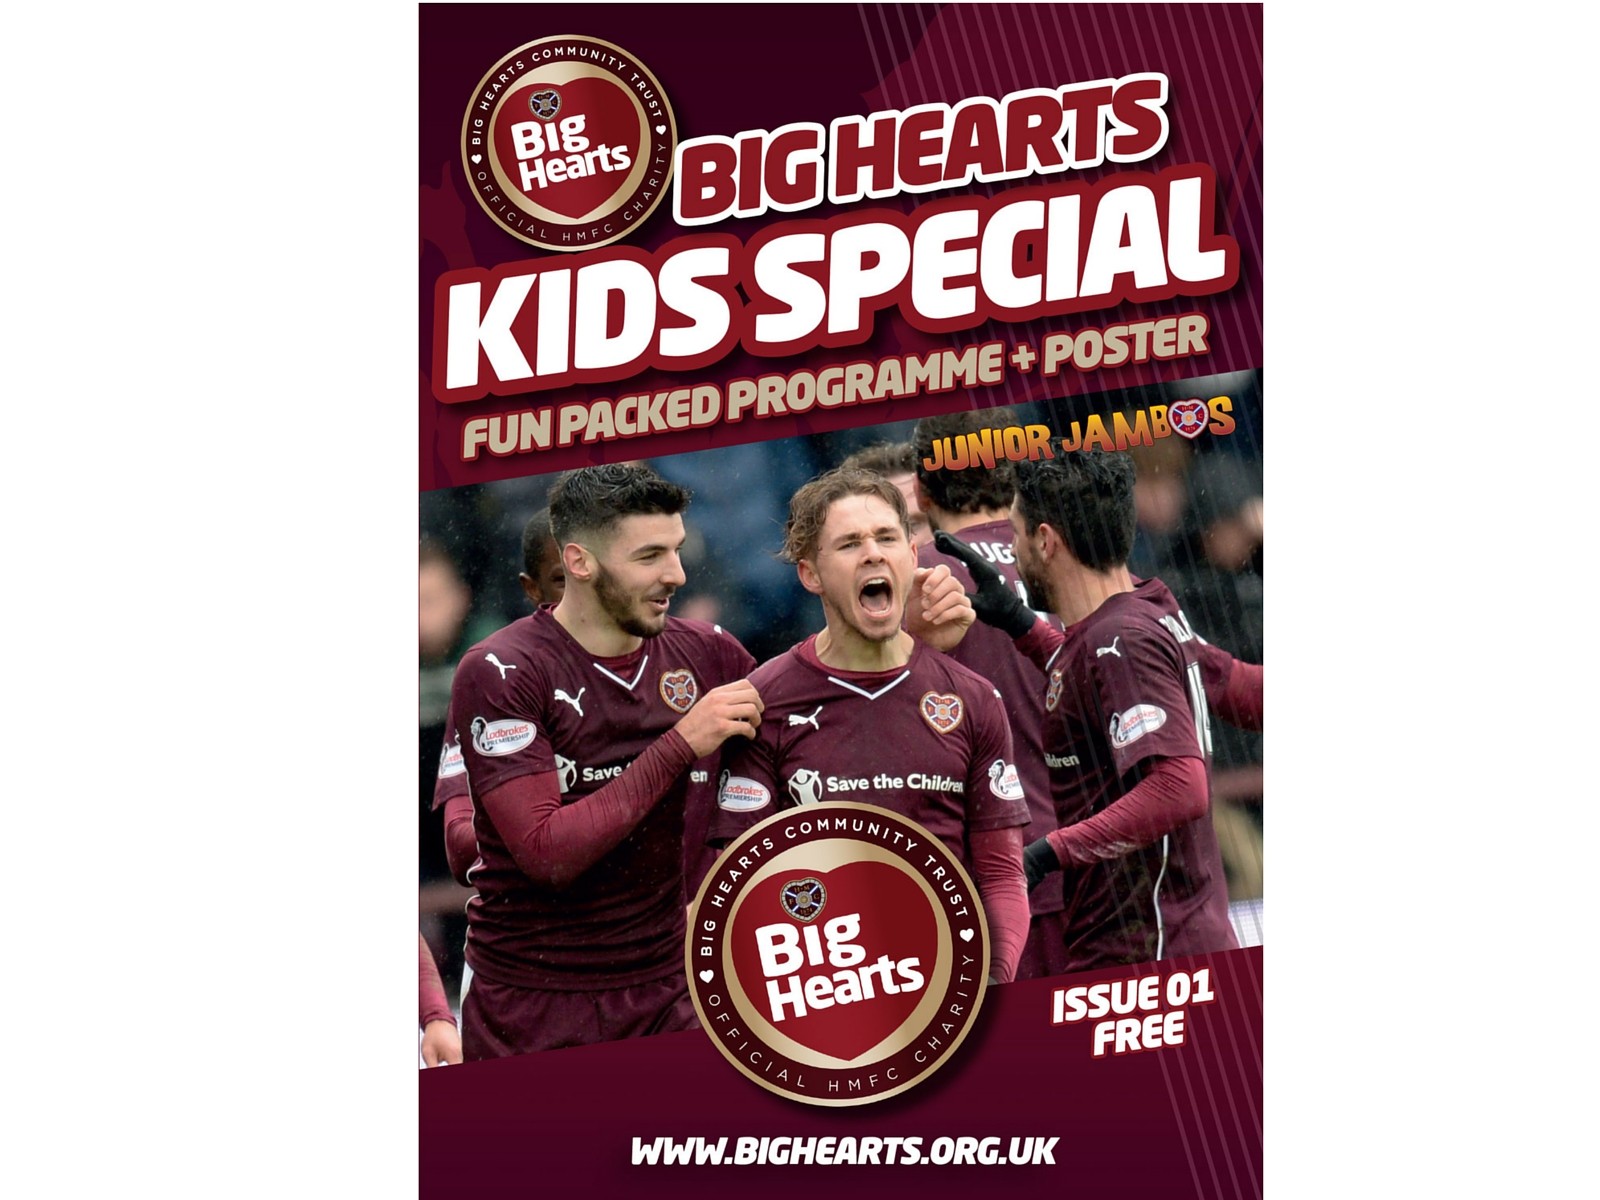  » Free Kids Special Programme at Tomorrow’s Game!